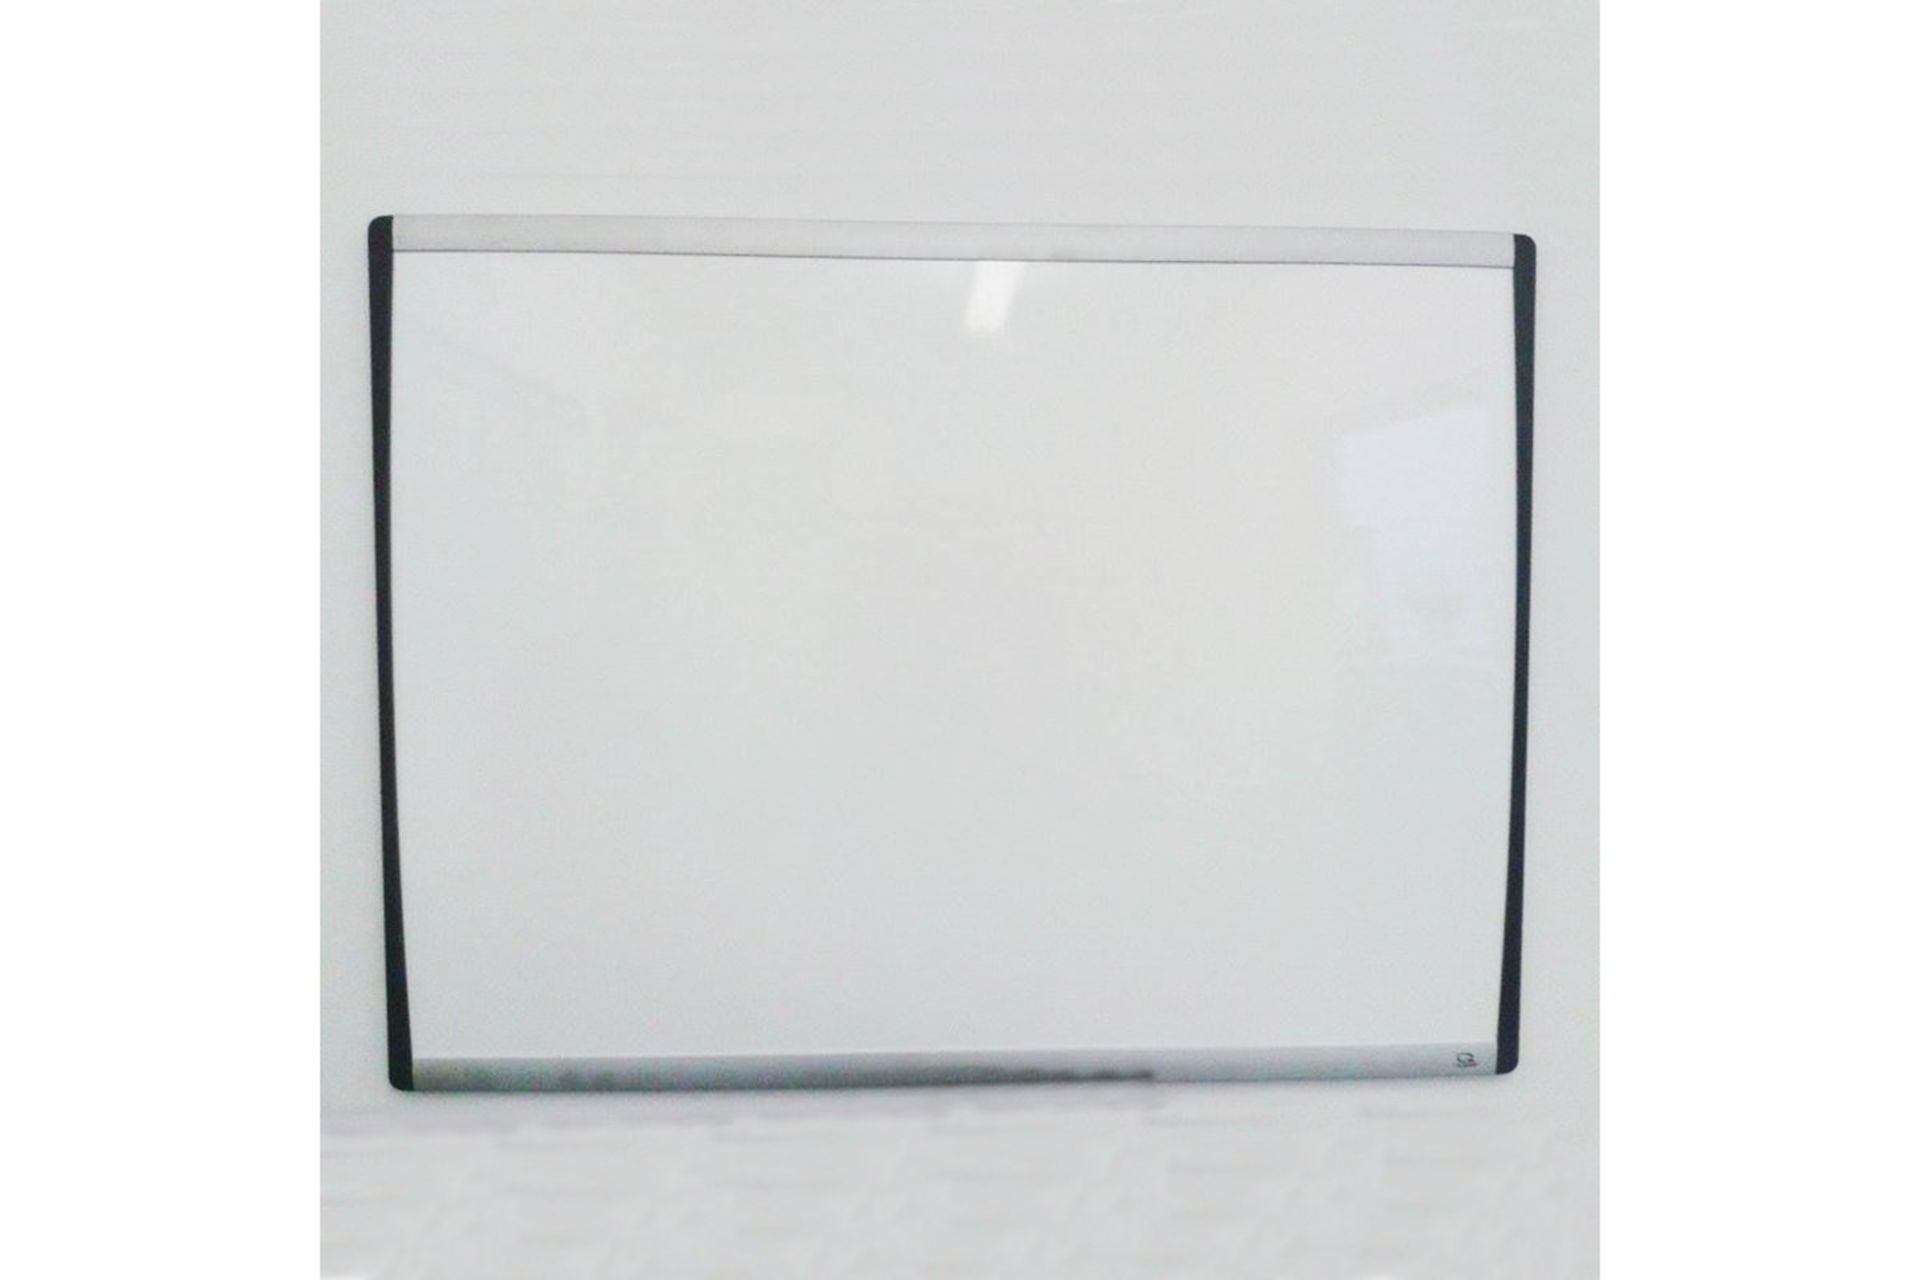 V Brand New Magnetic Whiteboard (size: 30CM x 24CM) Frame made from high quality aluminium X 2